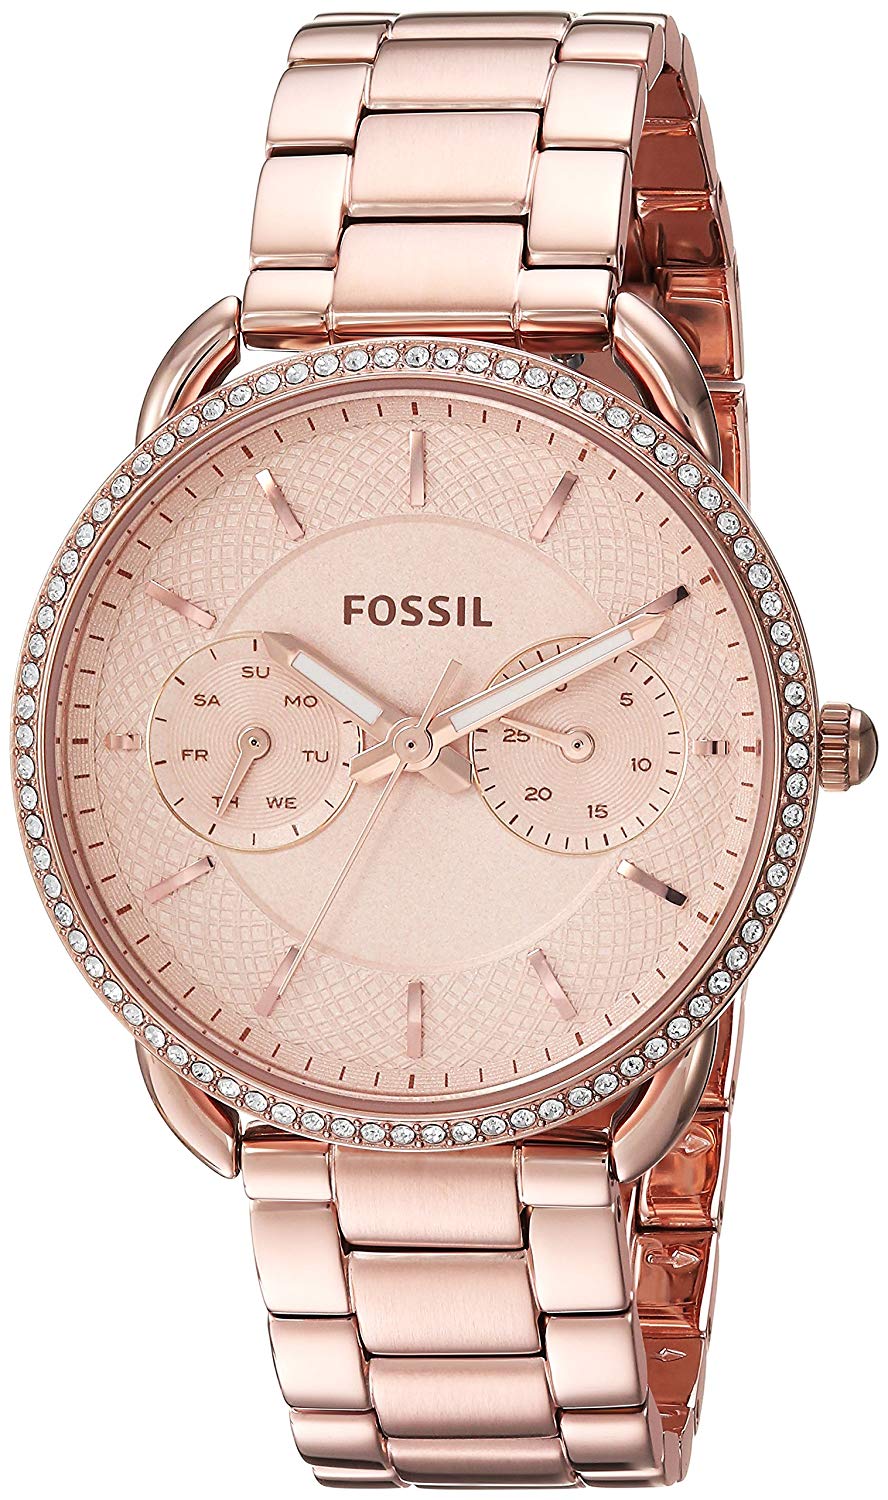 Tailor Multifunction Rose Gold-Tone Stainless Steel Watch | Fossil | Luby 